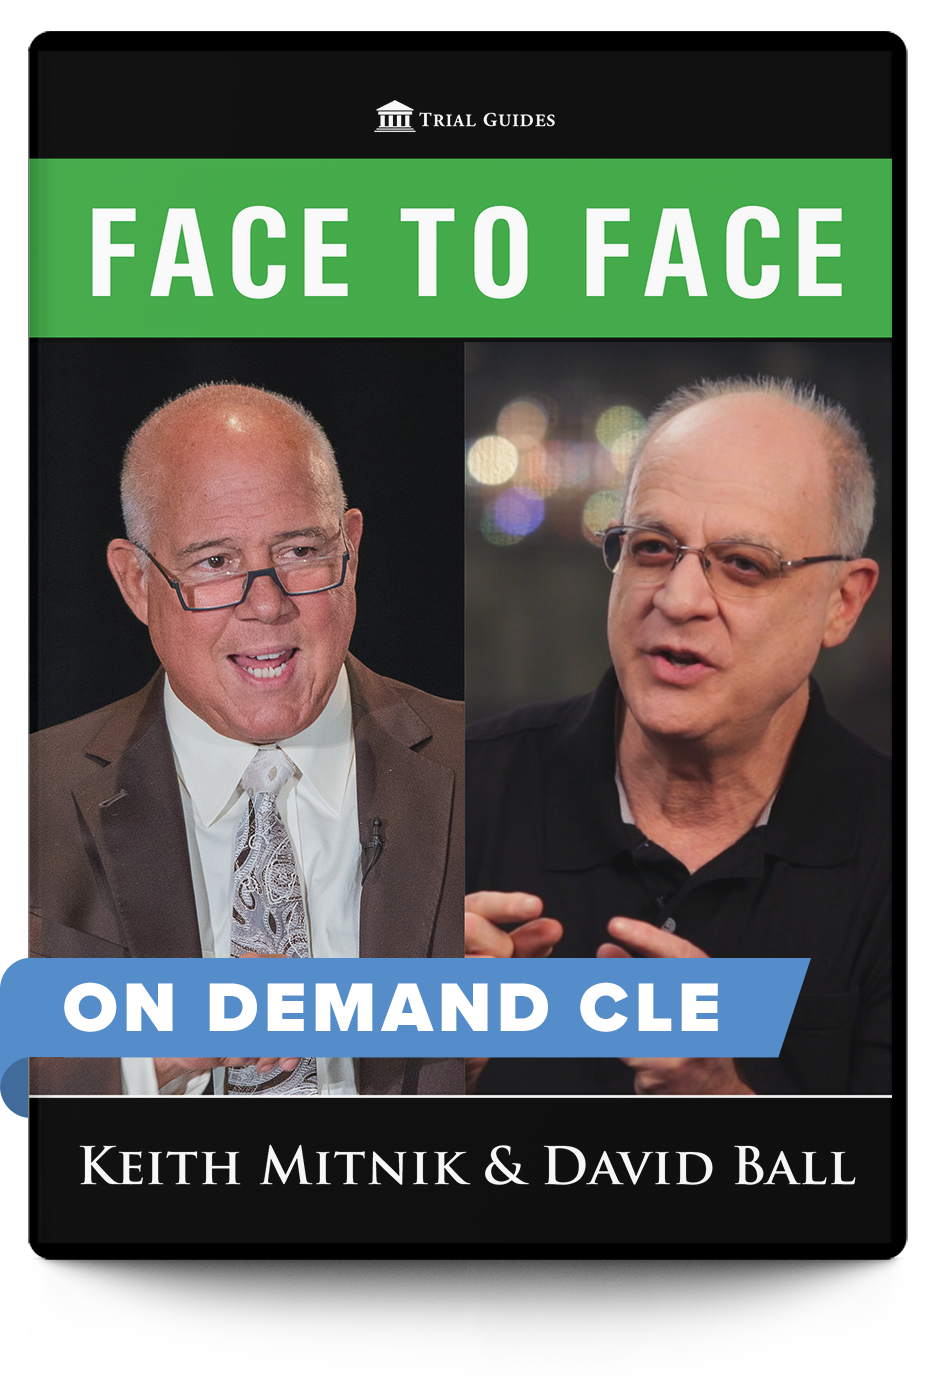 Face to Face: Keith Mitnik & David Ball (On Demand CLE)